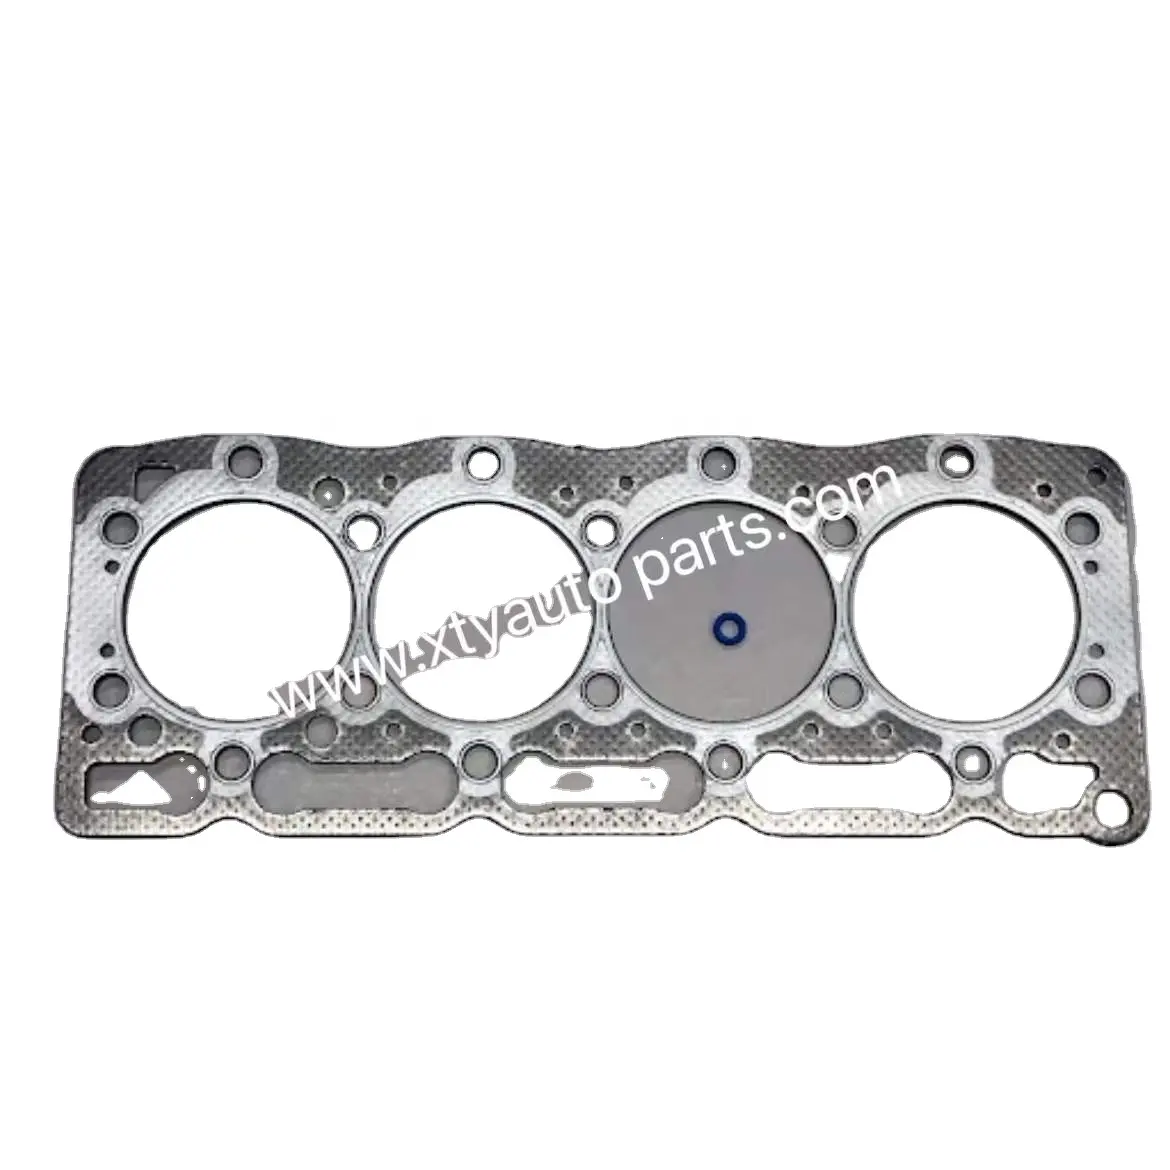 Carrier Transicold parts 25-15026-00 25-15026-01 Head Gasket Carrier Transicold Gasket Maxima Engines 4.91 Kub--ota D 1505